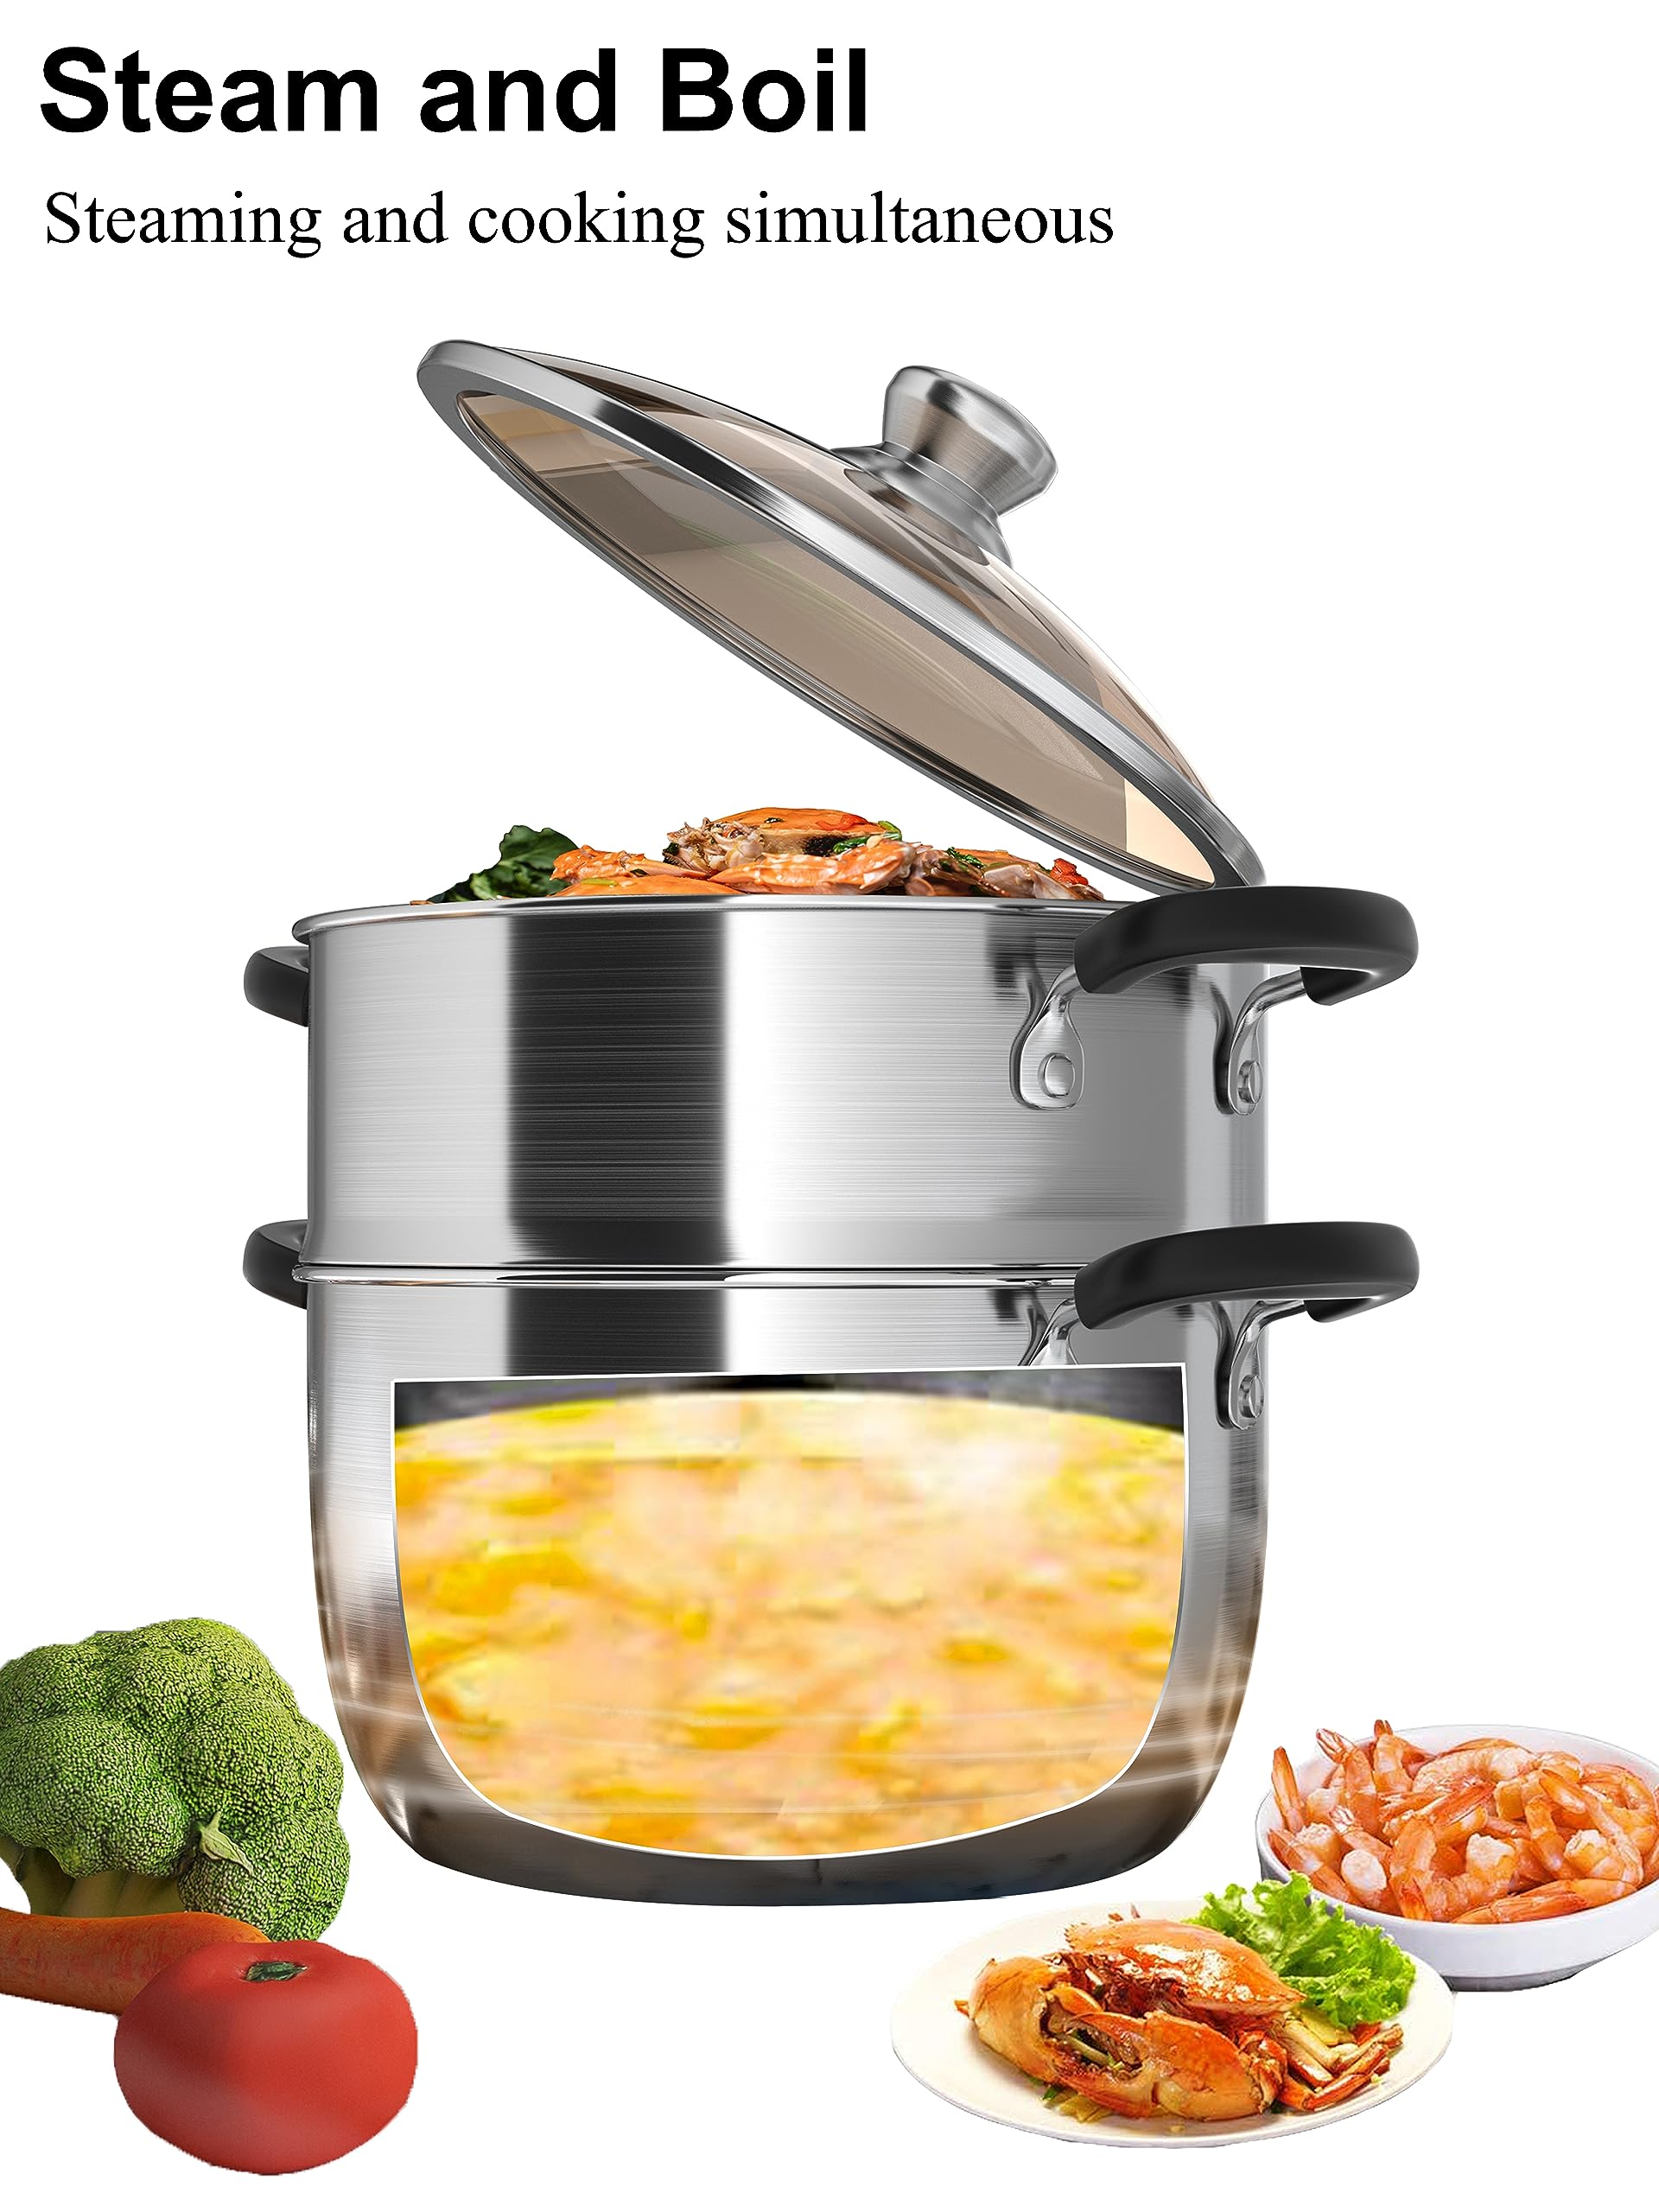 VENTION Steamer Pot for Cooking, Vegetable Steamer, 5-Ply Stainless Steel Steamer, 7.9 Inch